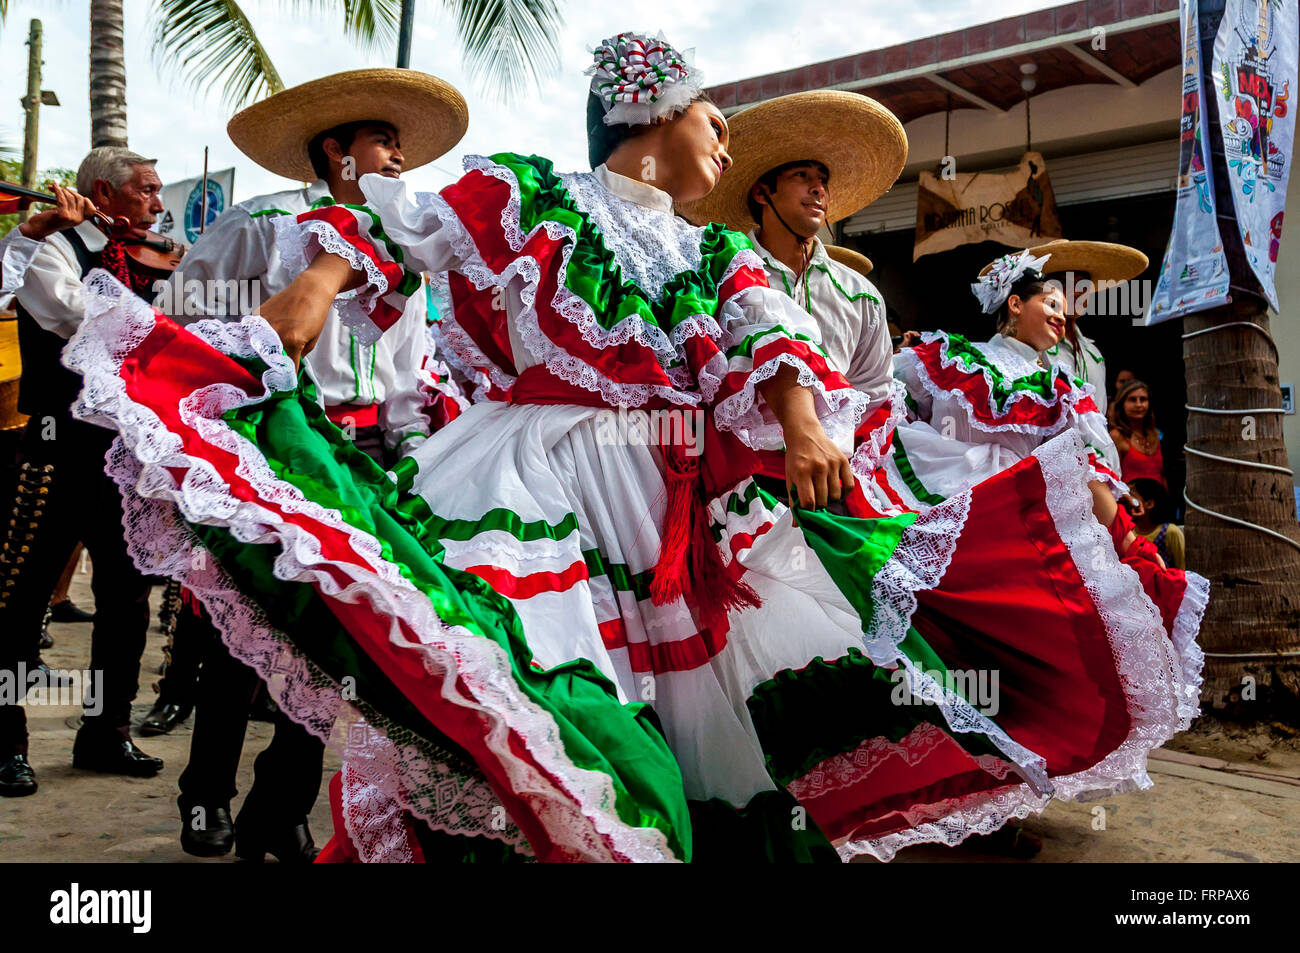 Sayulita, Nayarit: Mexican dancers wear the bright colors of Mexico's flag (red, white, green) dancing in parade with mariachis. Stock Photo